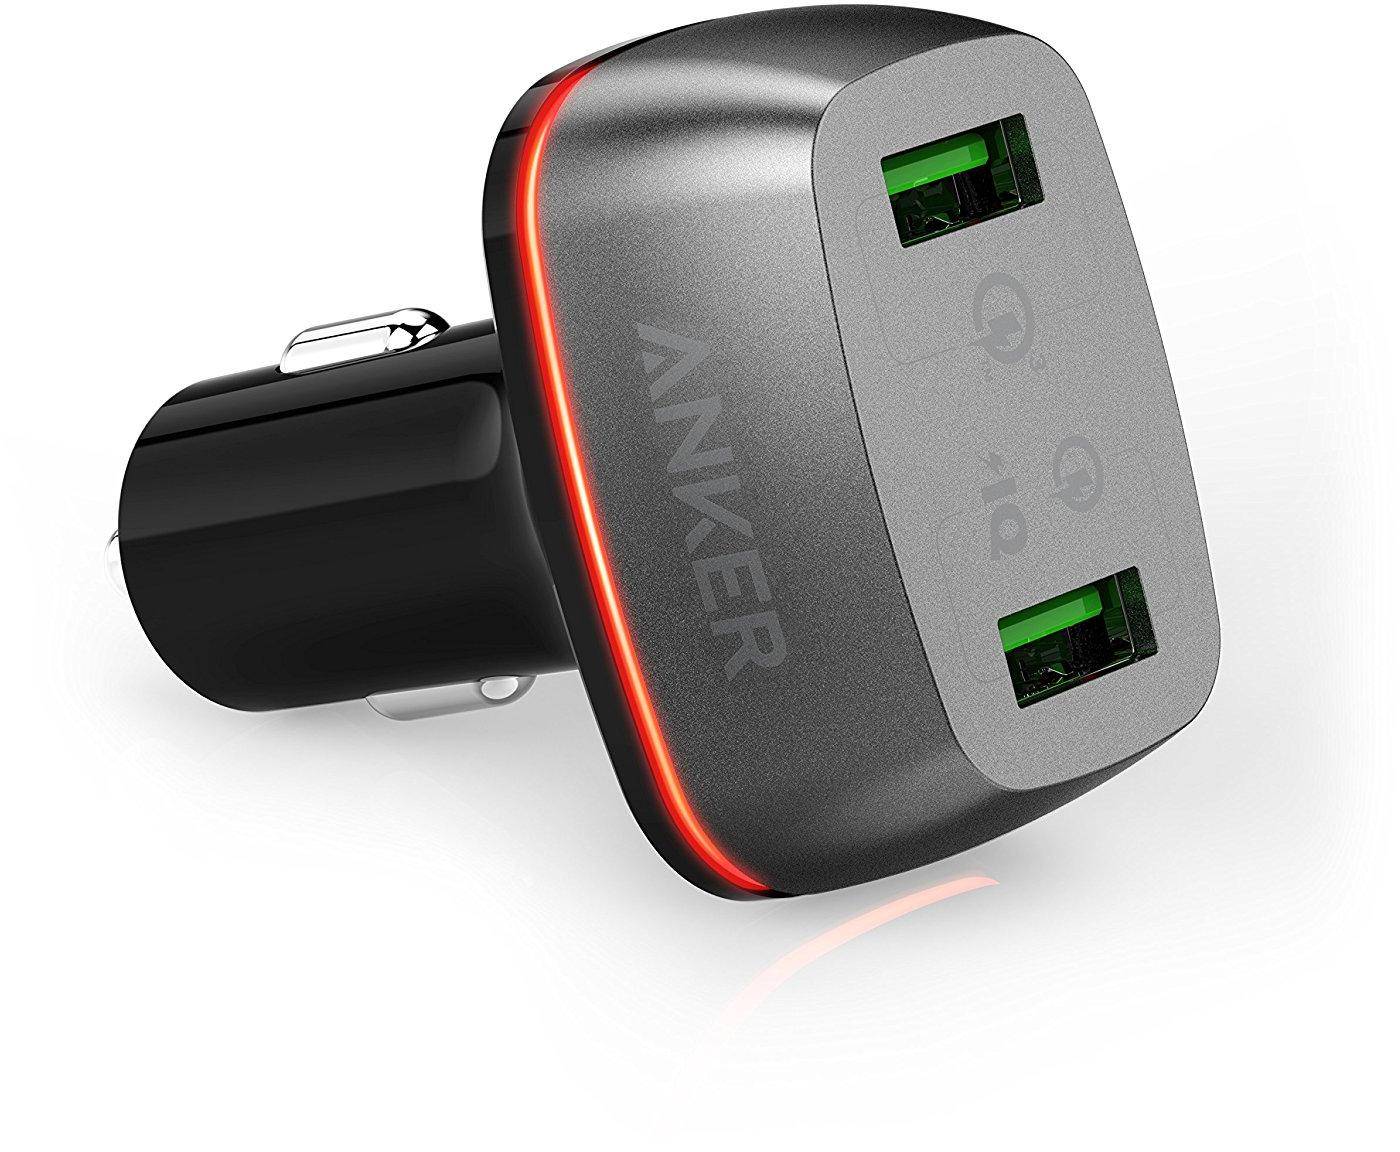 Anker Quick Charge 3.0 42W Dual USB Car Charger, PowerDrive+ 2 Universal Charger zoom image